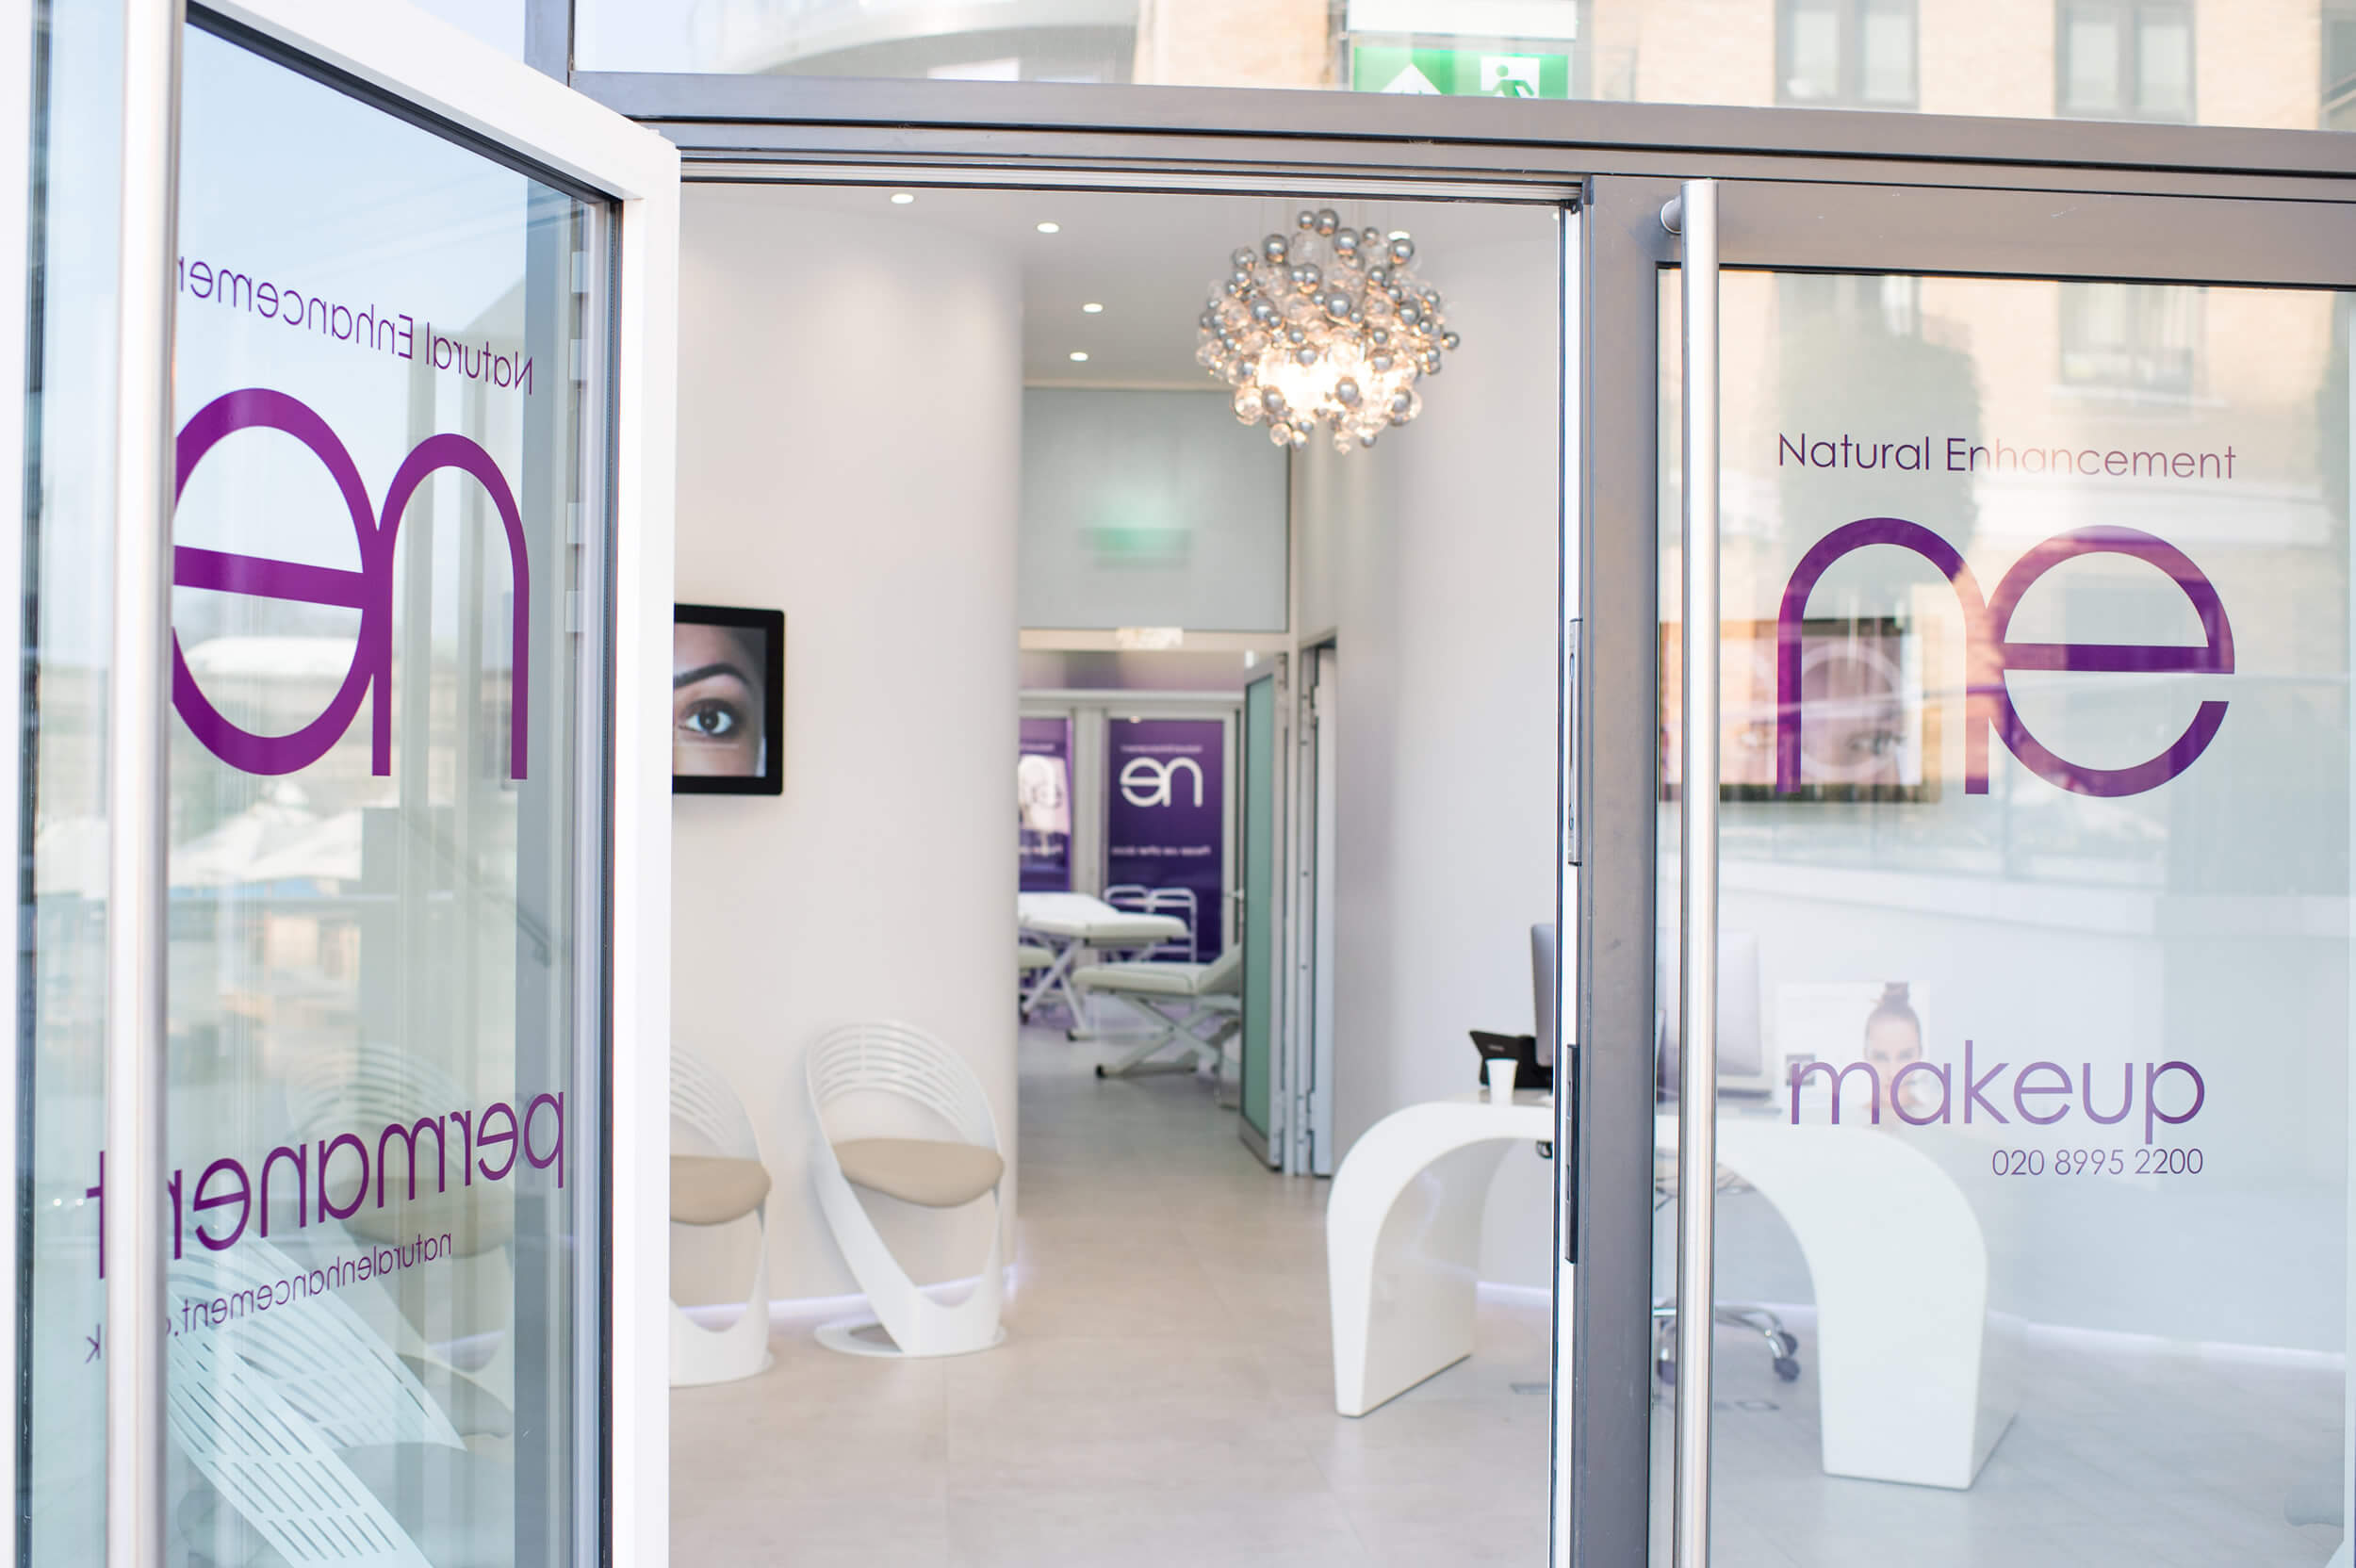 Four of the best Eyebrow Clinics in the UK